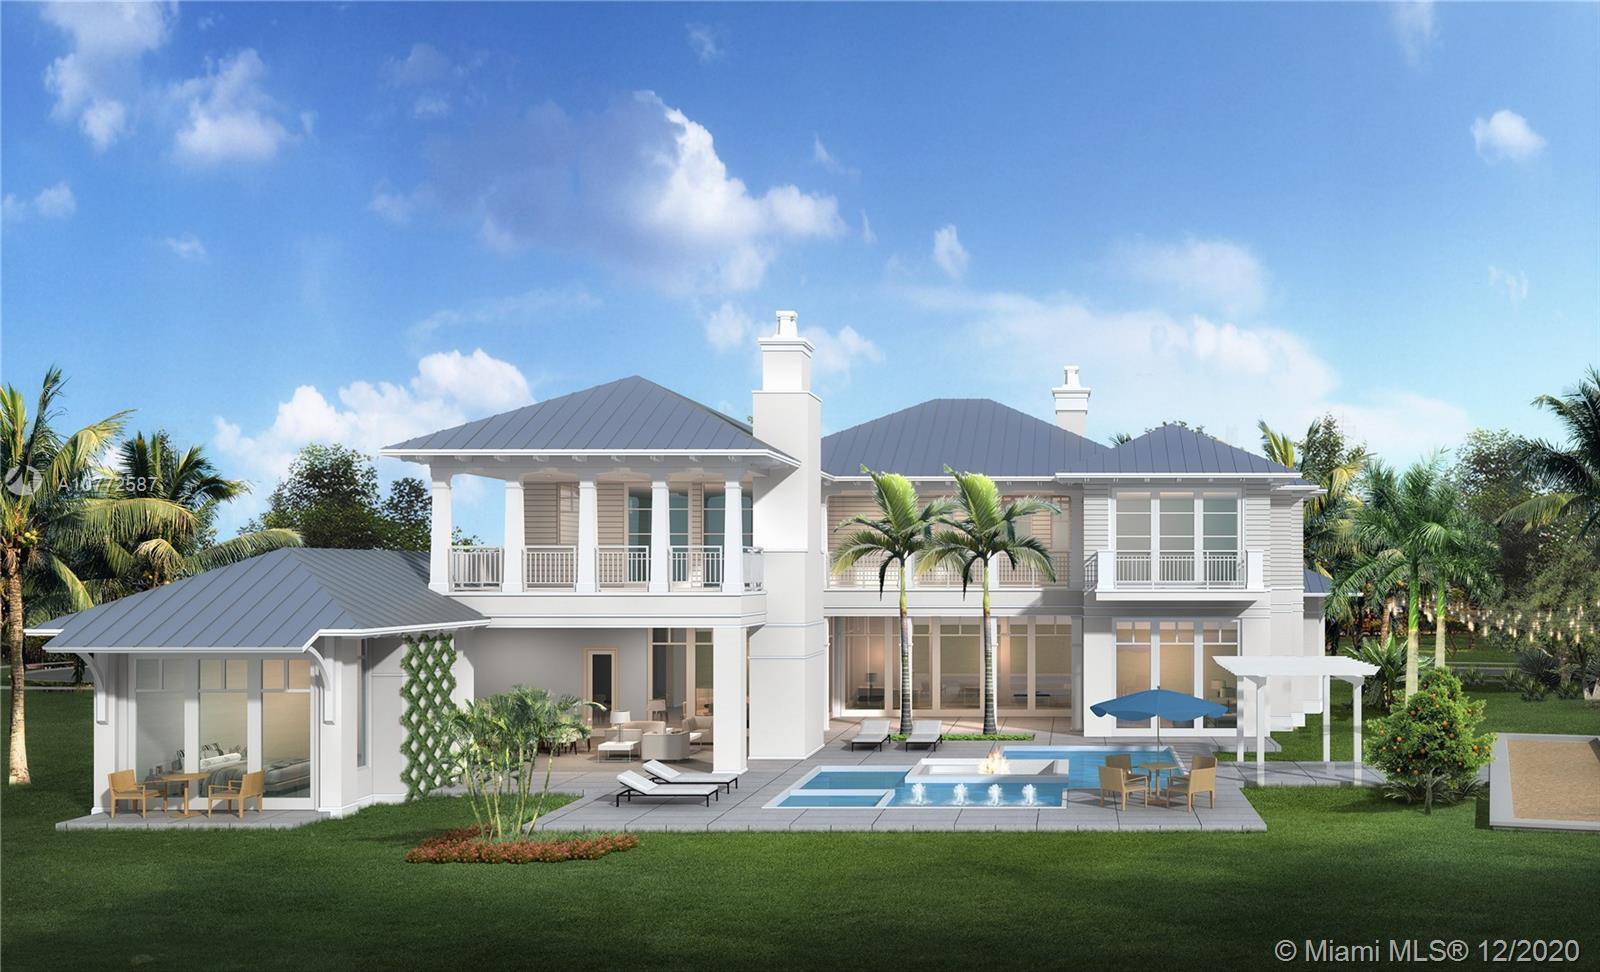 Spectacular builder's own custom estate ready in first quarter 2022 in The Enclave at Coral Ridge Country Club, an exclusive 24 hour guard gated community with only 36 residences.